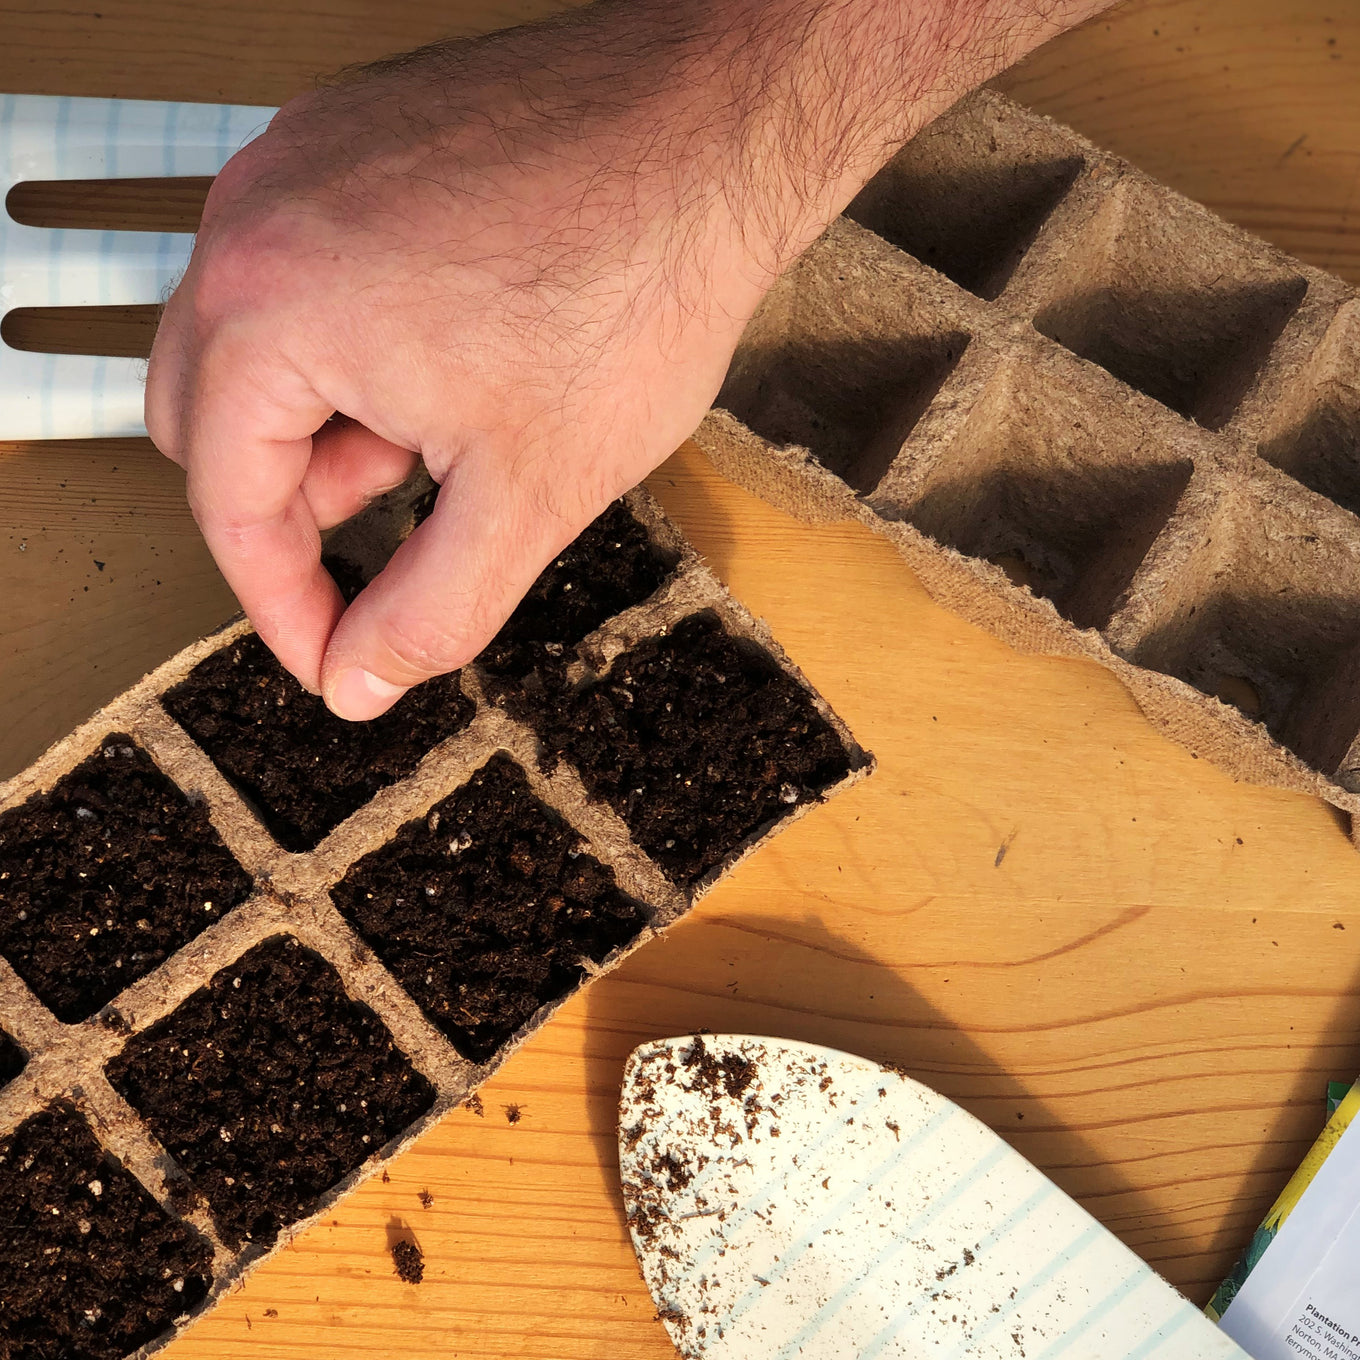 Plant your Organic Beefsteak Tomato seeds in biodegradable Jiffy peat strip trays filled with seed starting mix.